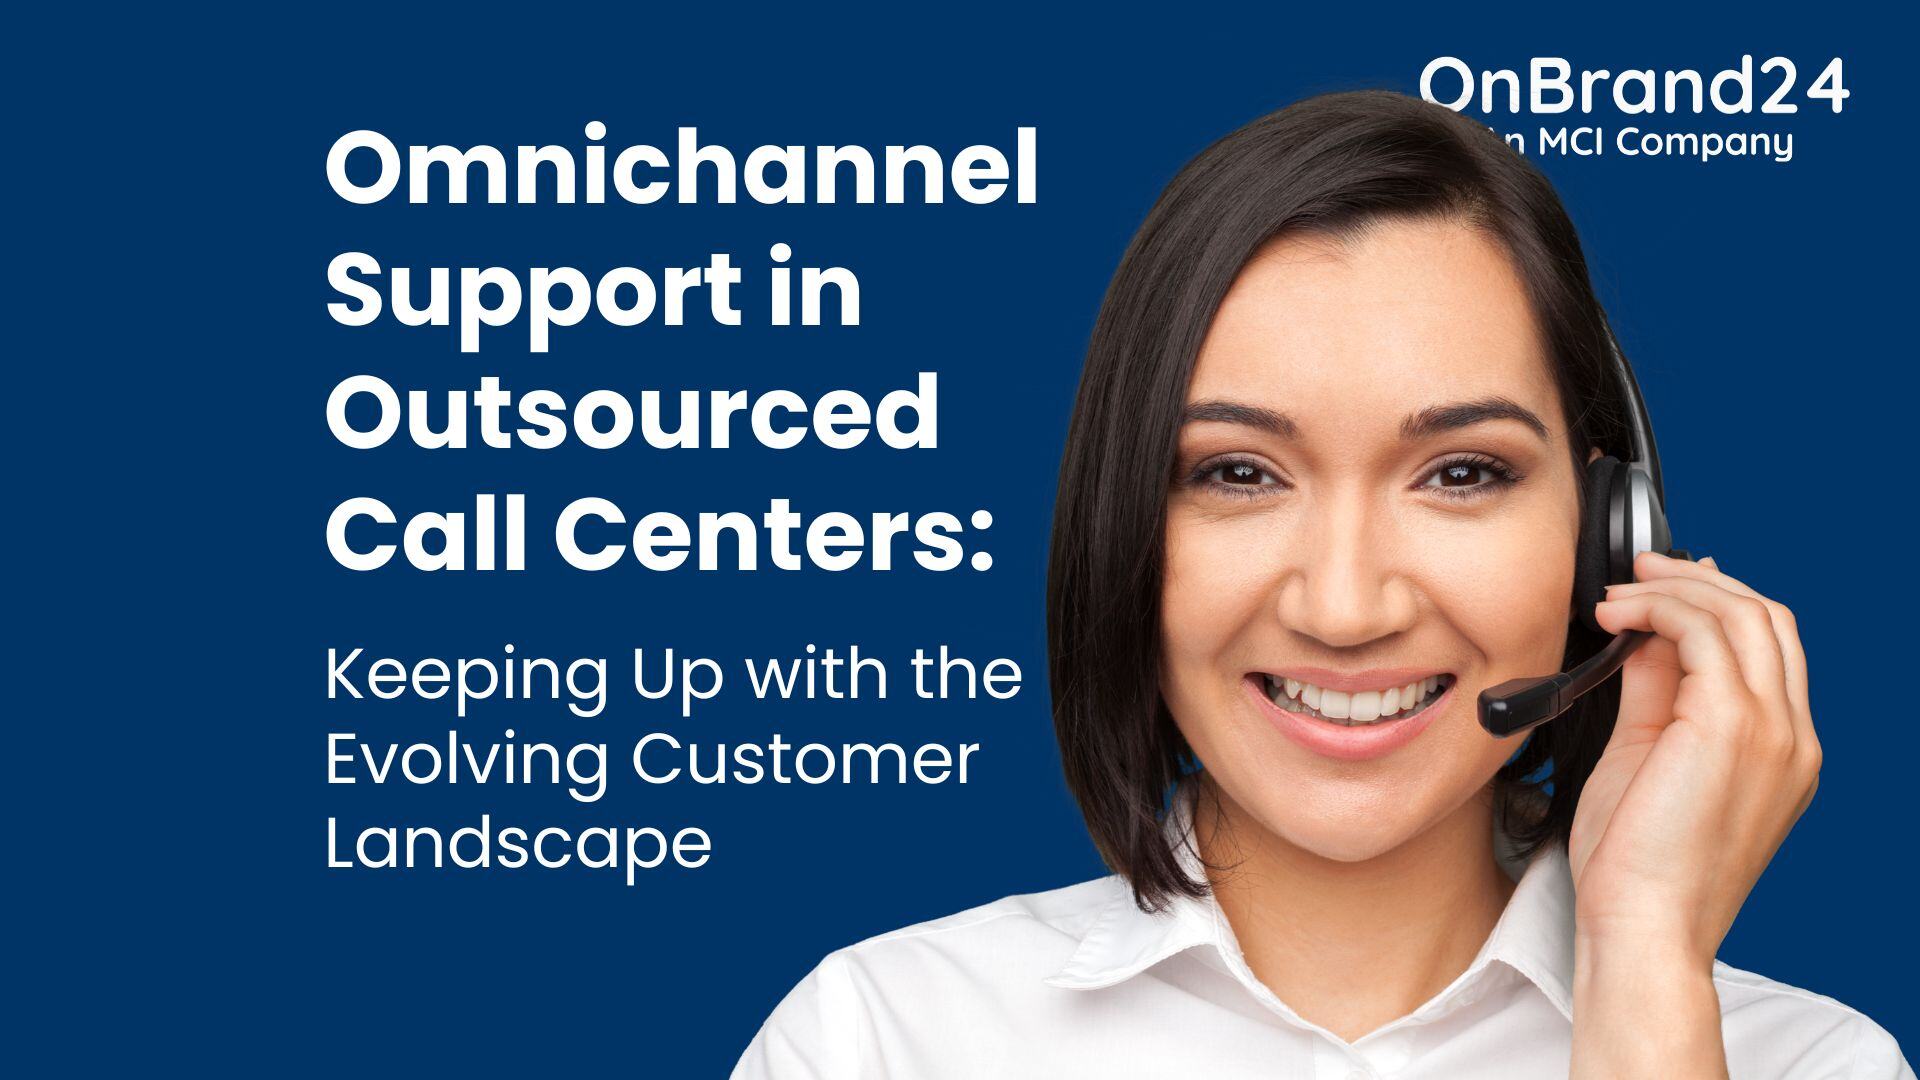 Omnichannel Support in Outsourced Call Centers - Featured Image